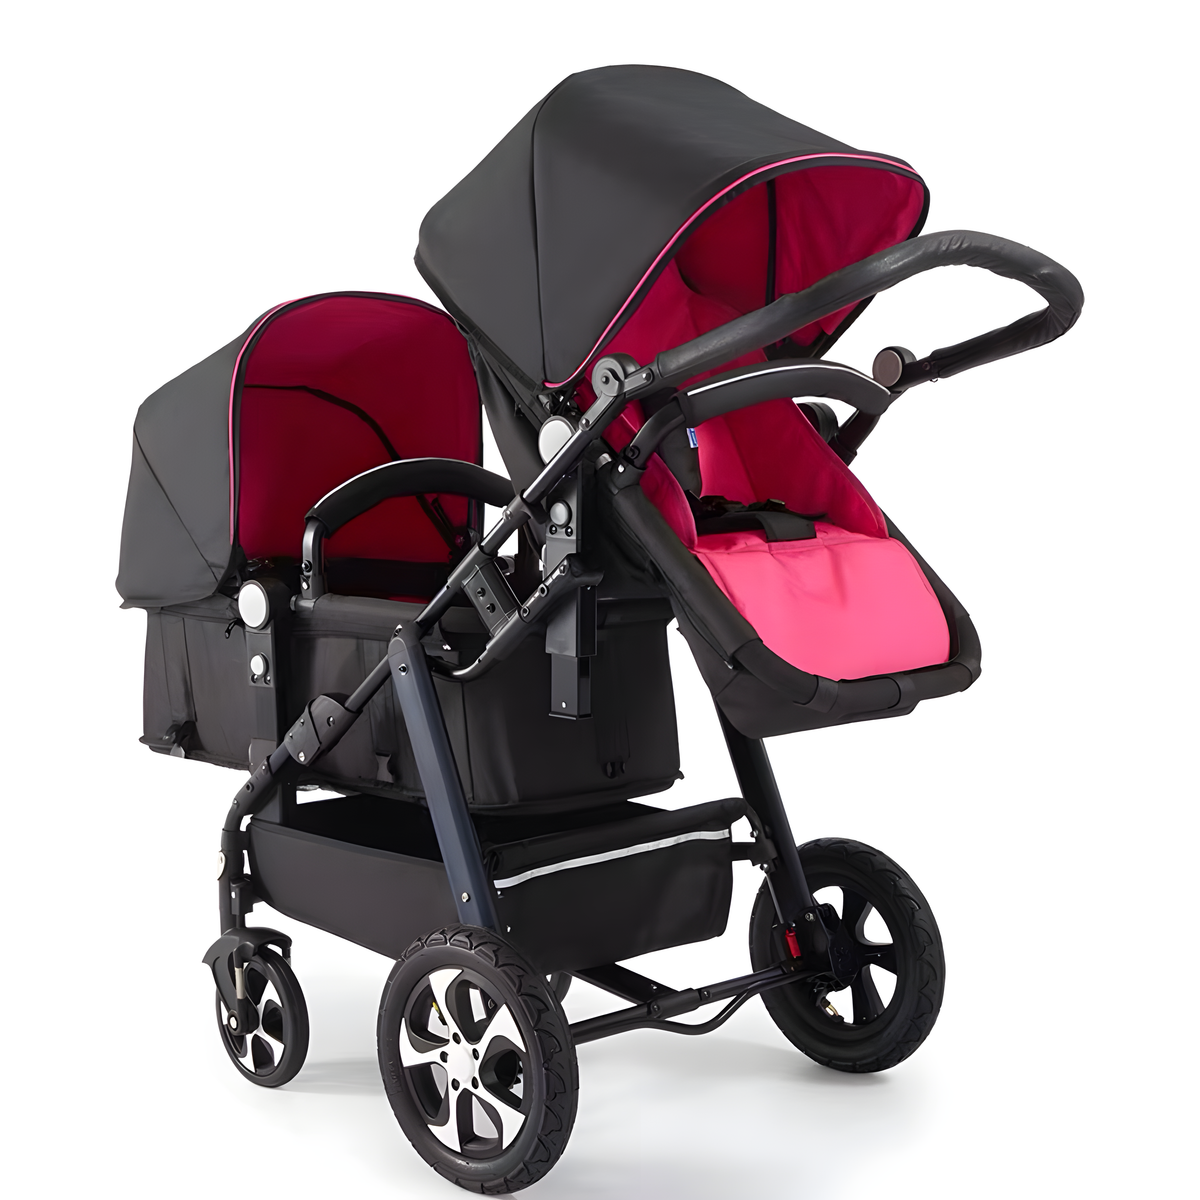 Grand Twin Baby Stroller